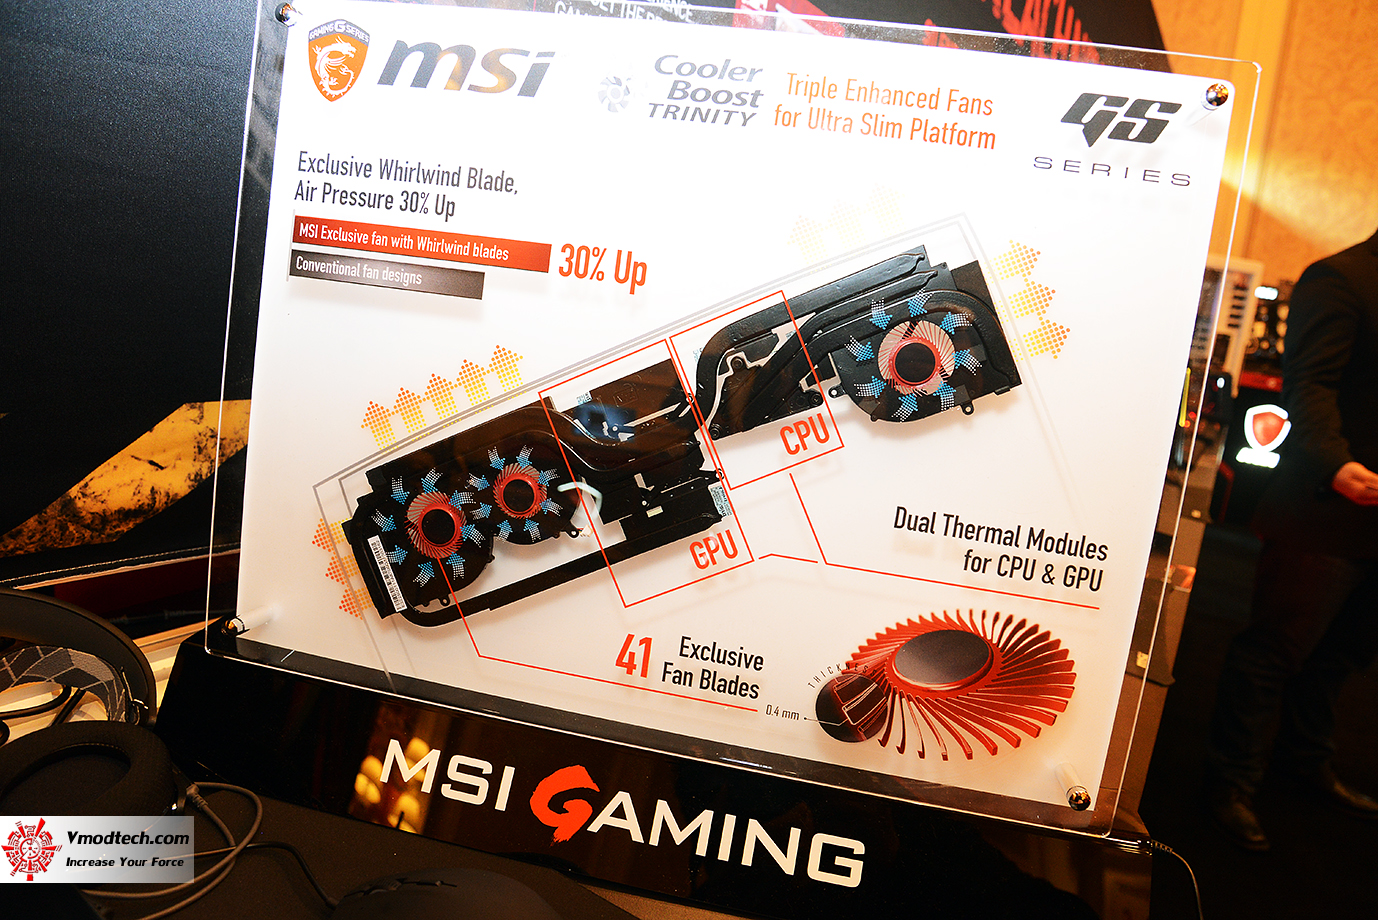 dsc 1946 MSI GAMING NOTEBOOK CES2017 LAS VEGAS PREVIEW